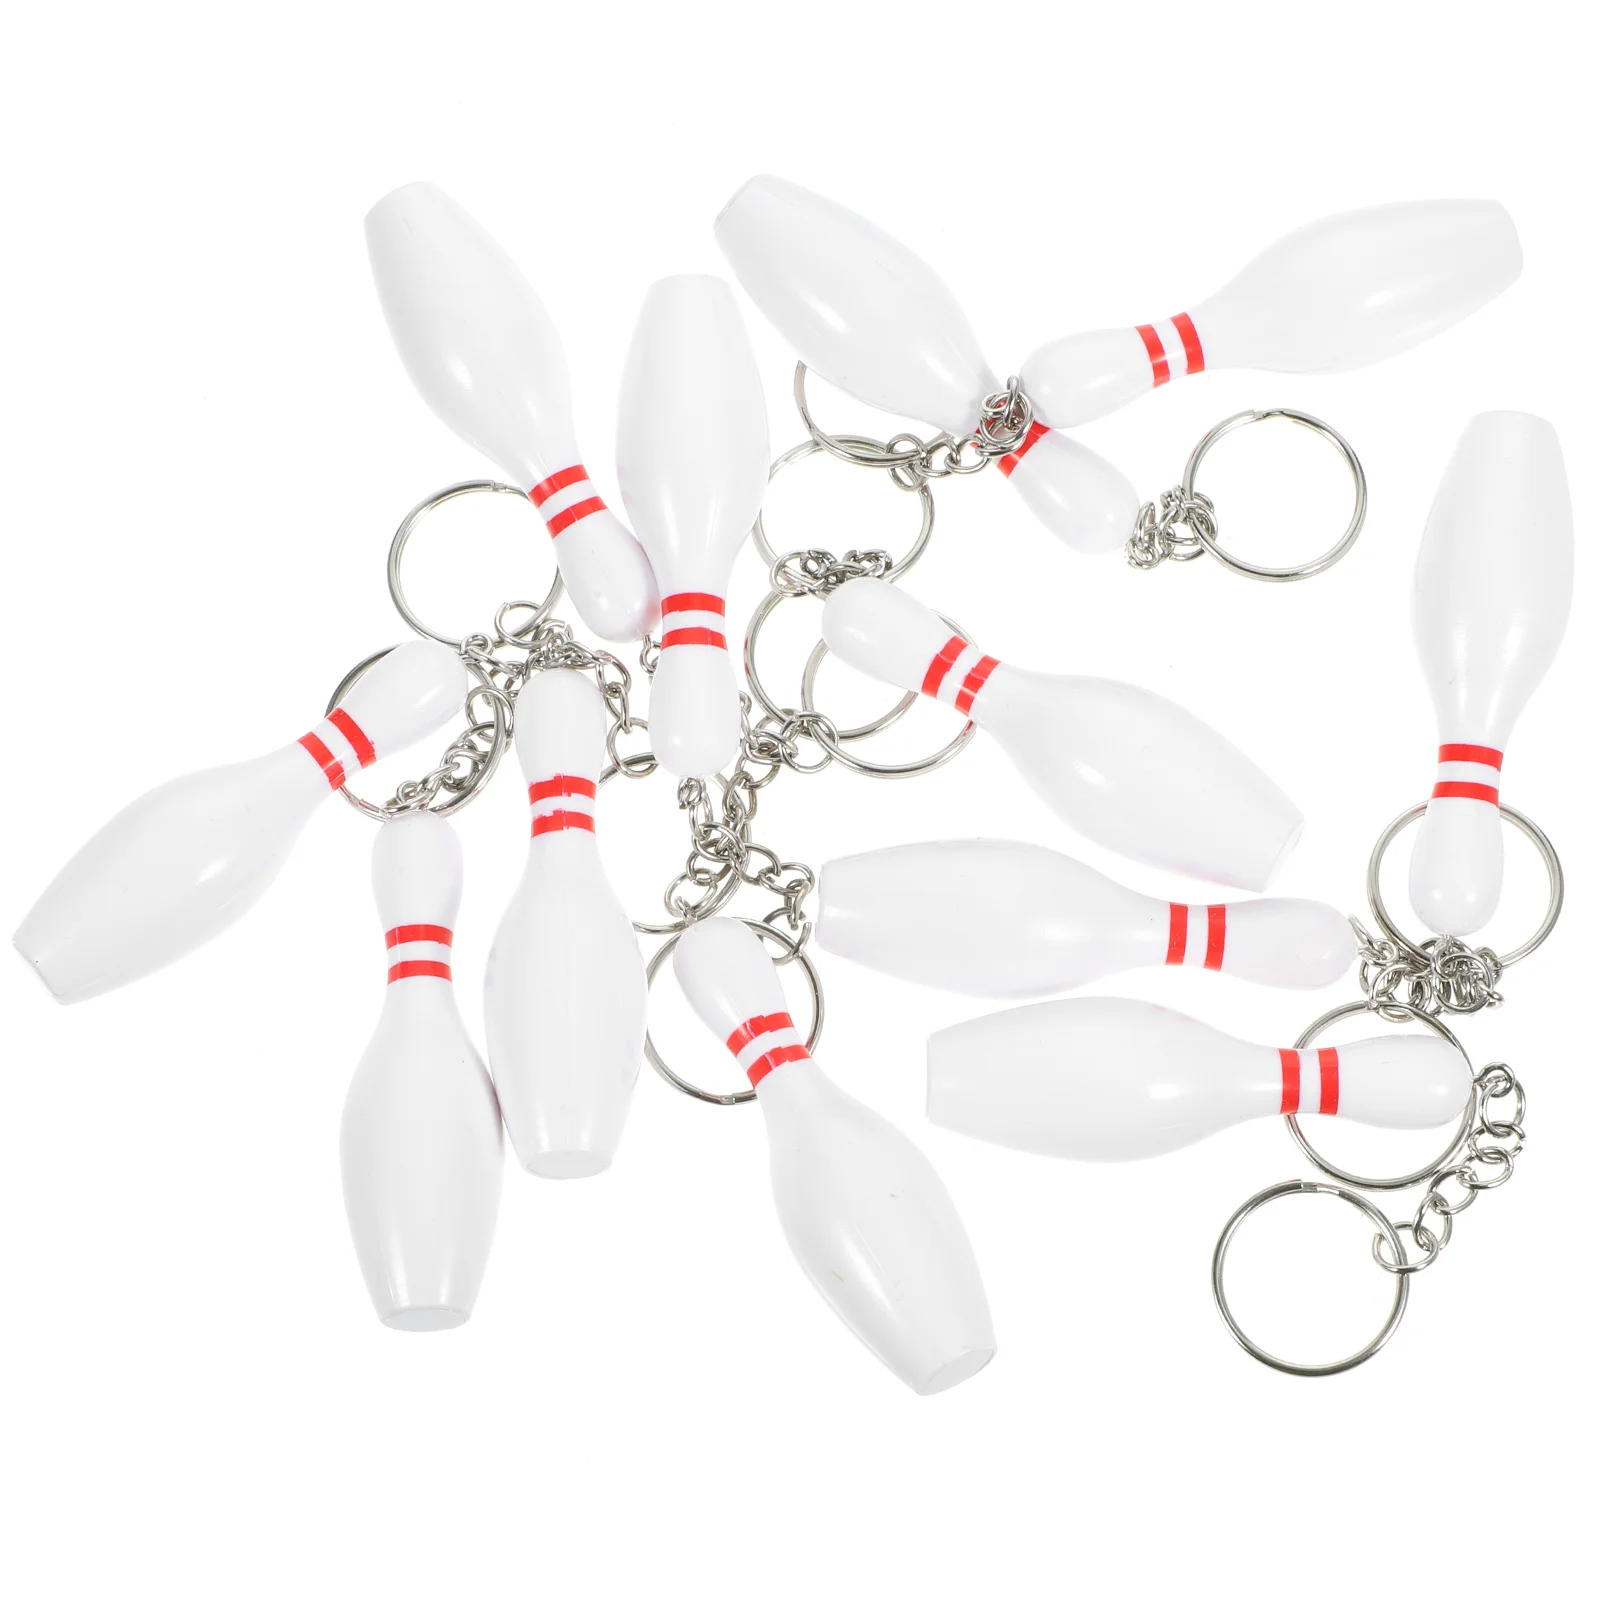 

12 Pcs Bowling Keychain Small Keychains Rings Backpack Delicate Hanging Design Metal Sports Themed Match Keepsakes Tool